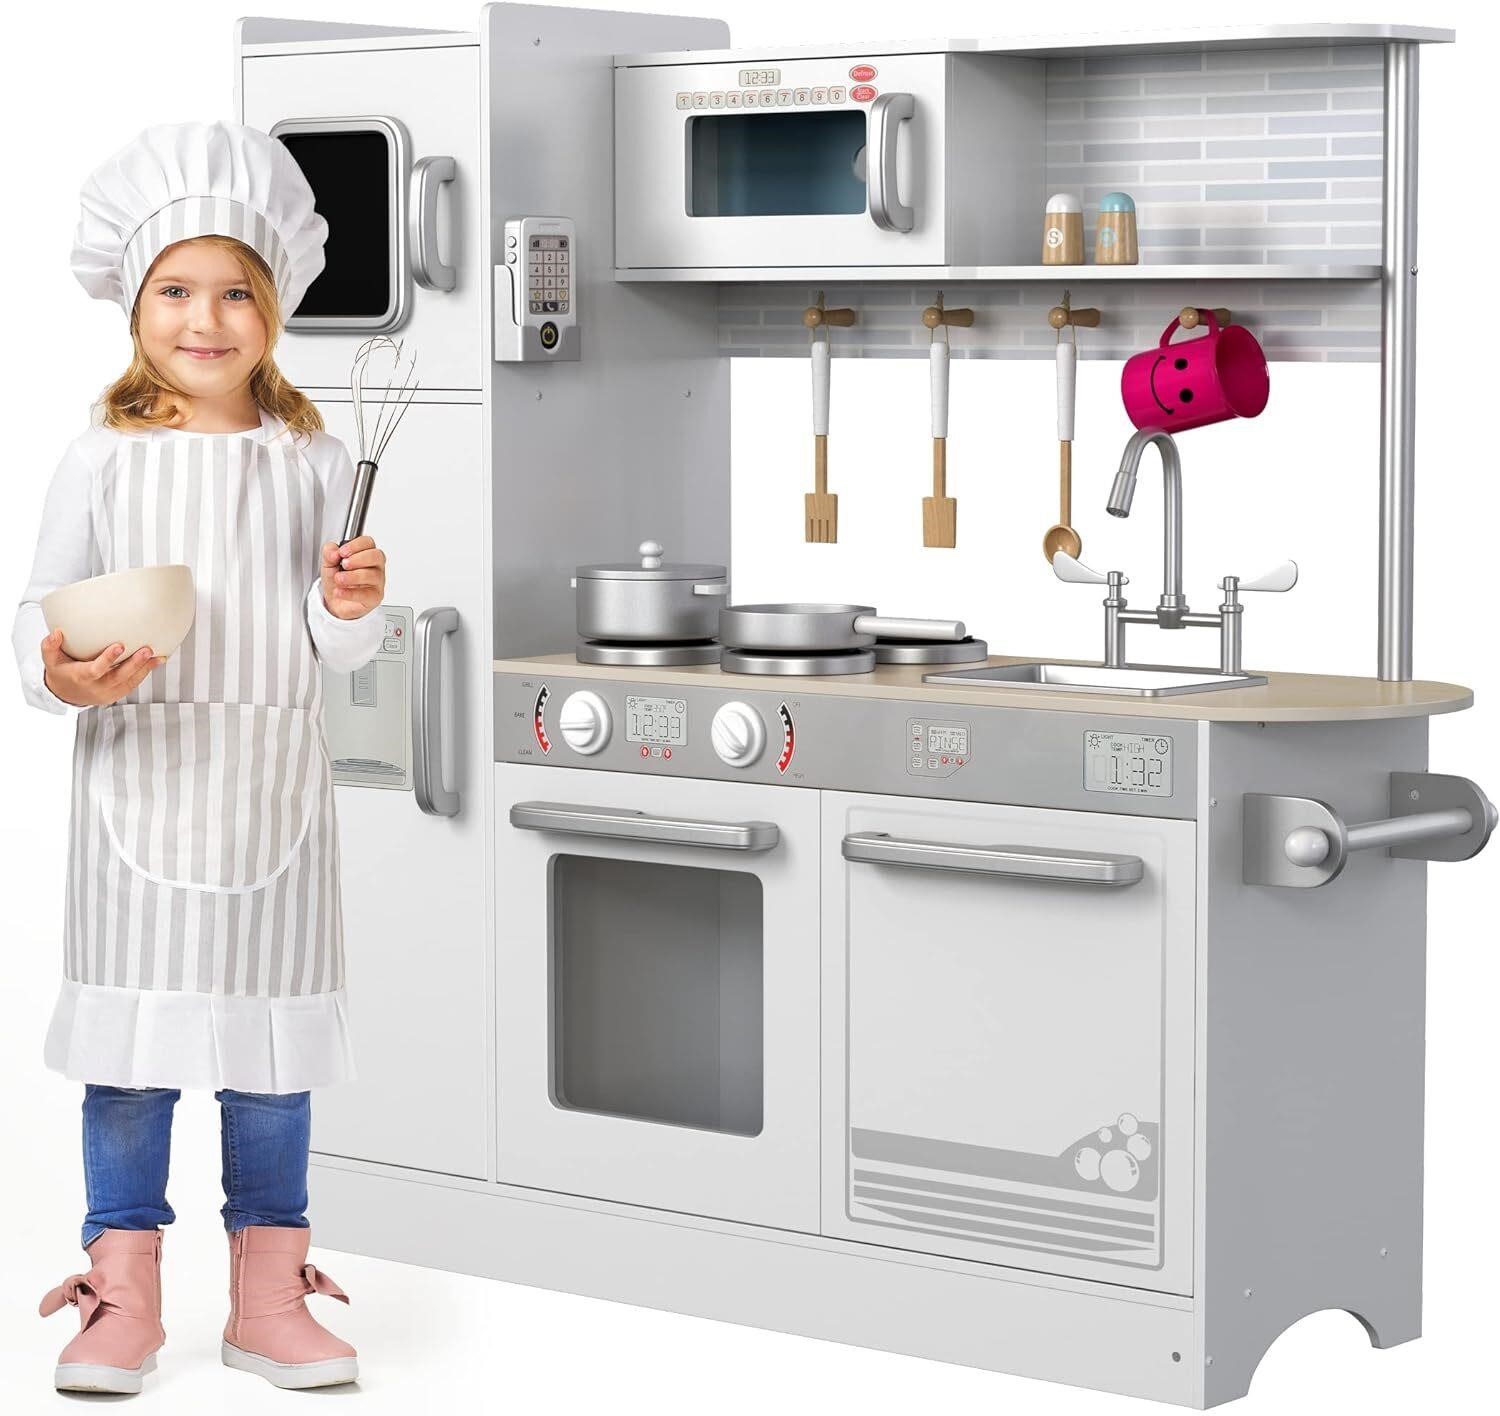 Play Kitchen - Wooden Kitchen Playset for Toddlers